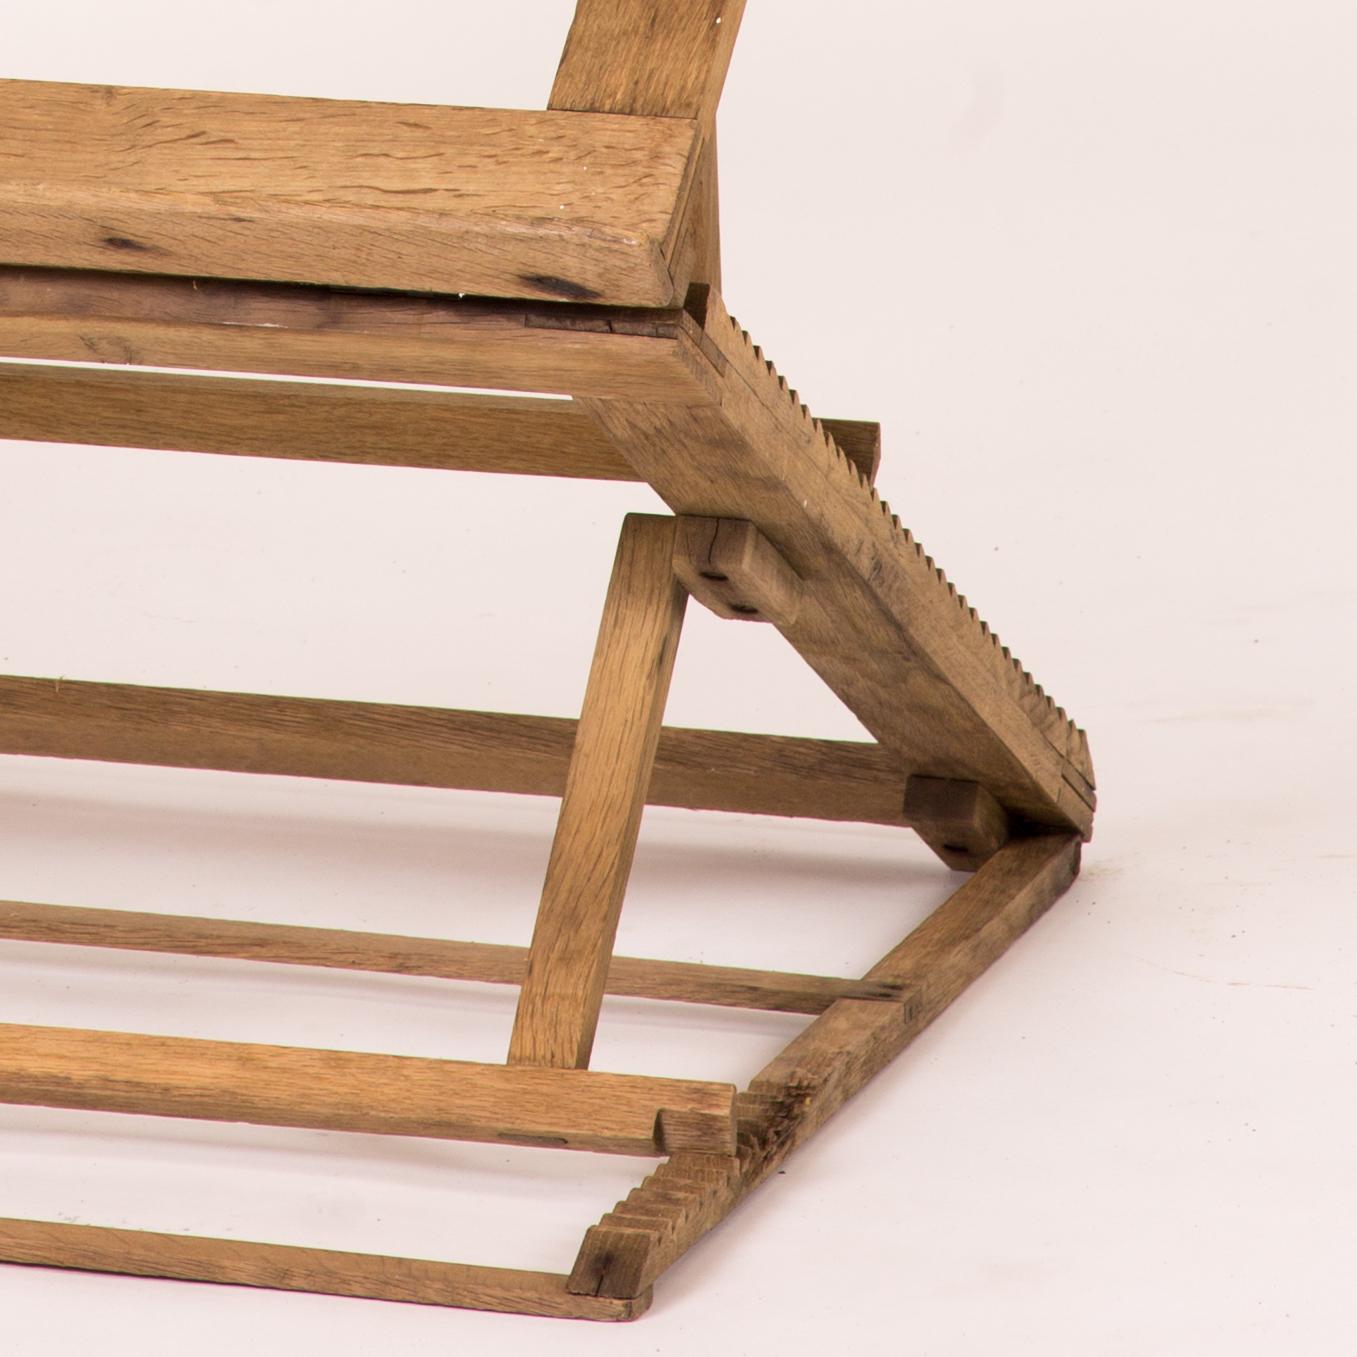 Collapsable and adjustable oak folio stand or easel from late 19th century England. 